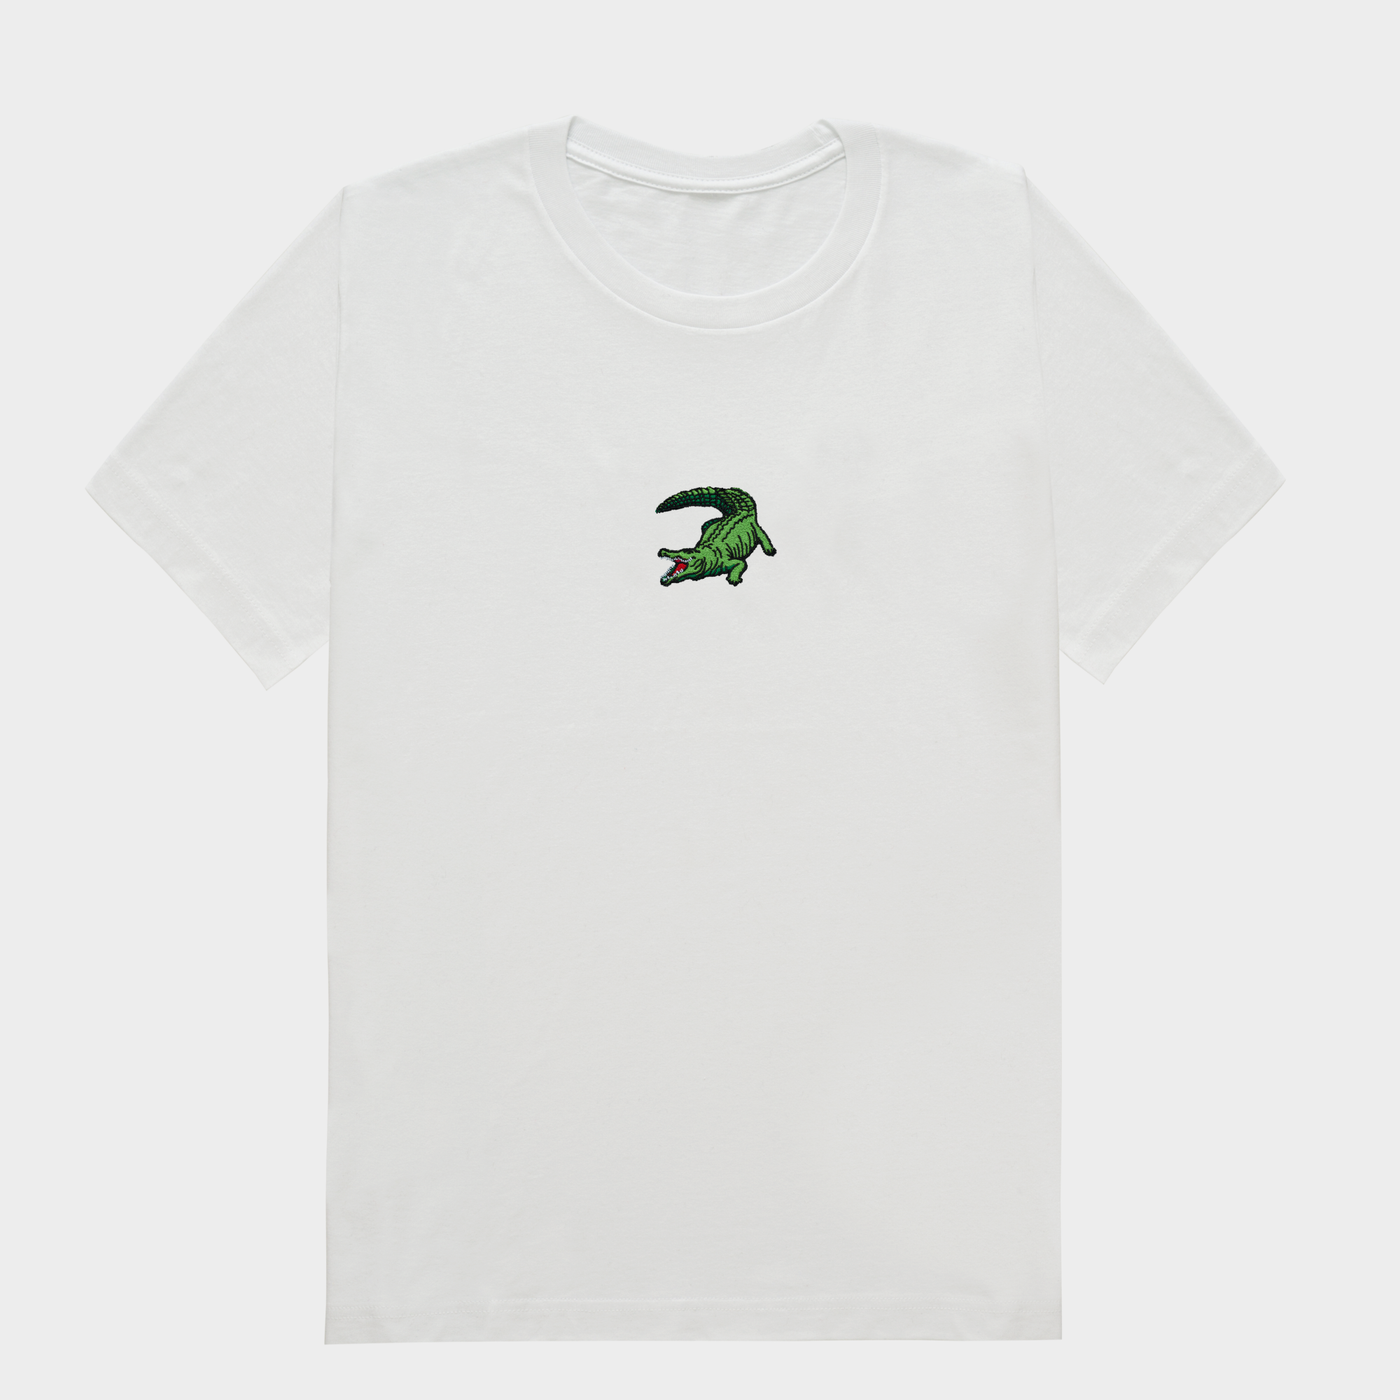 Bobby's Planet Women's Embroidered Saltwater Crocodile T-Shirt from Australia Down Under Animals Collection in White Color#color_white